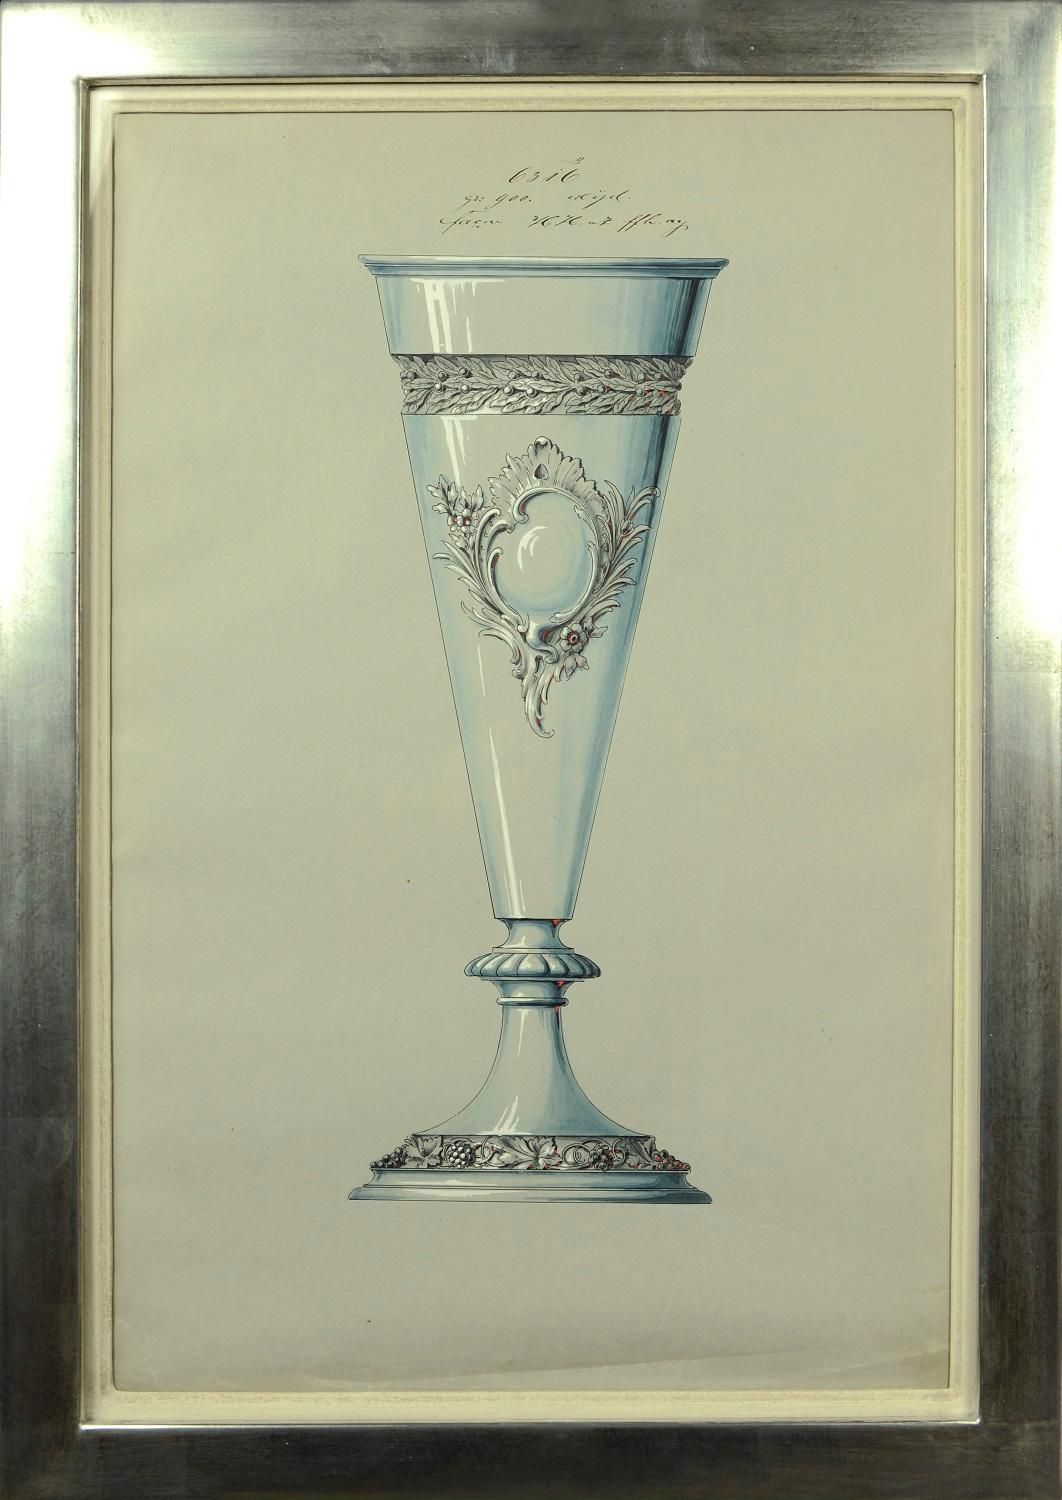 [ANON.]
Collection of Watercolour Designs for Silverware.
South Germany, [Late 19th century]. 

A series of 9 watercolours, each framed and glazed, overall size: 440 by 633mm (17¼ by 25 inches). These charming watercolours include drawings of